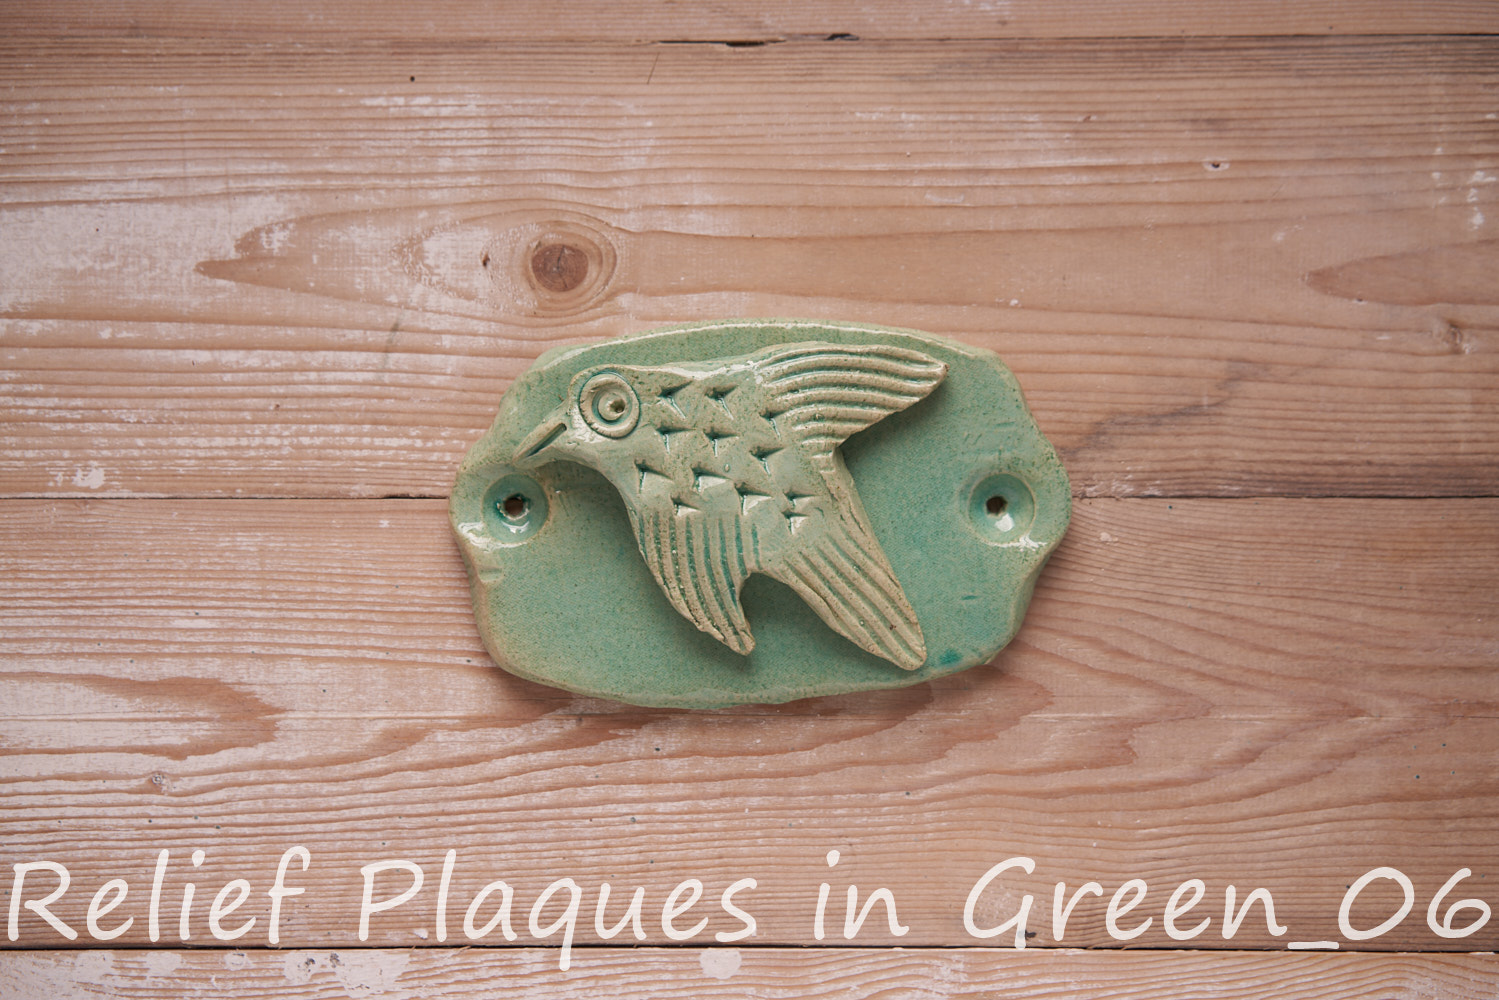 Relief Plaques in Green_06